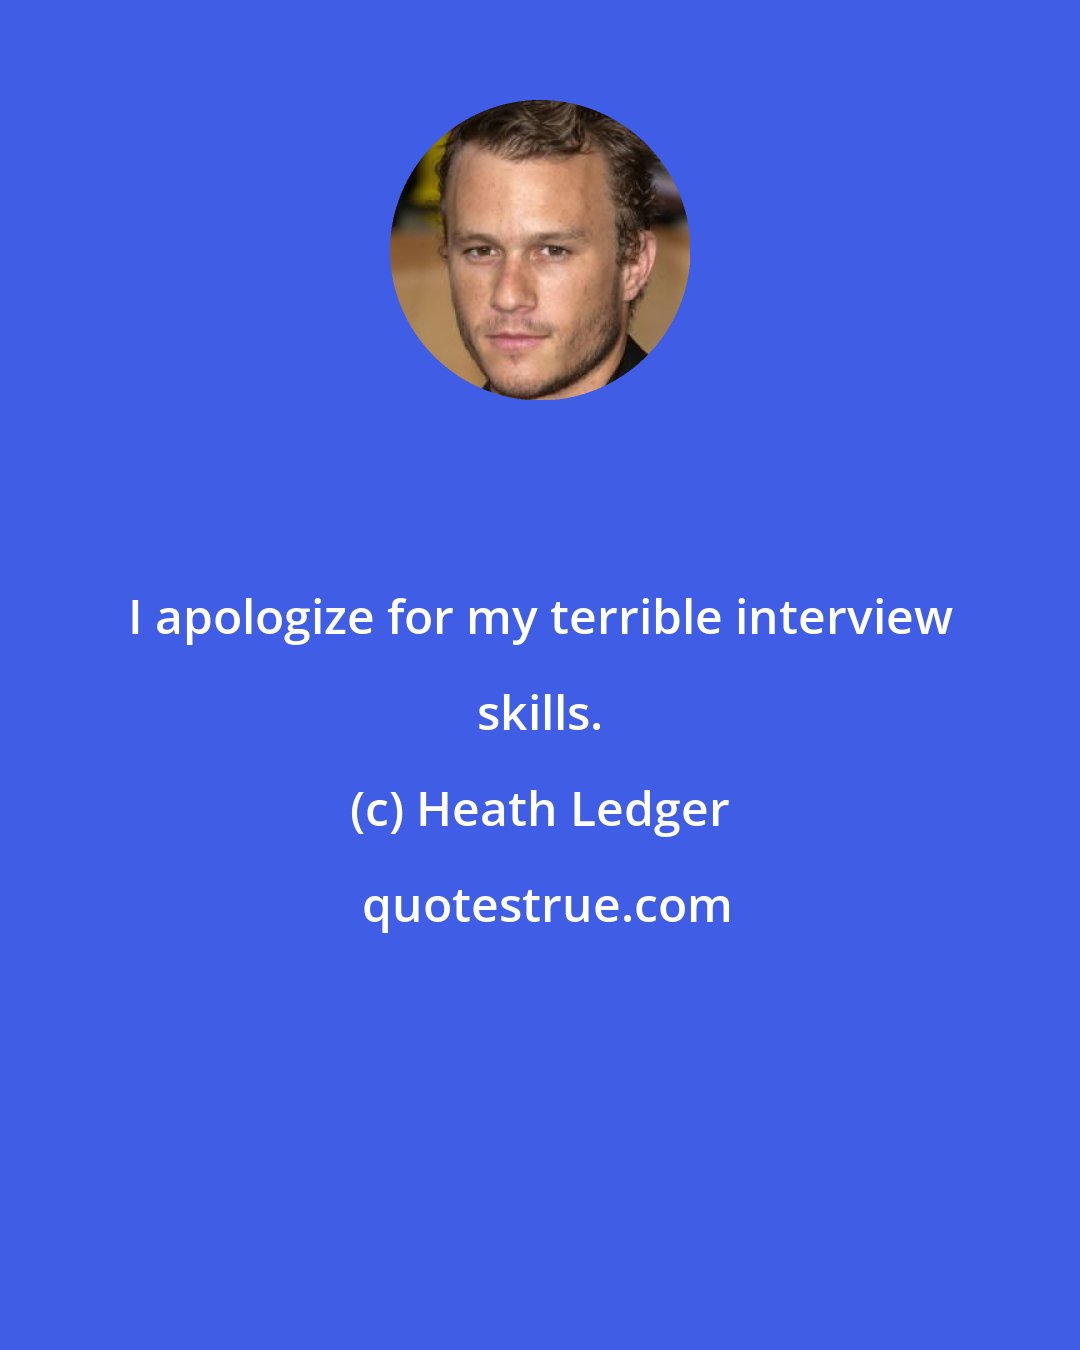 Heath Ledger: I apologize for my terrible interview skills.